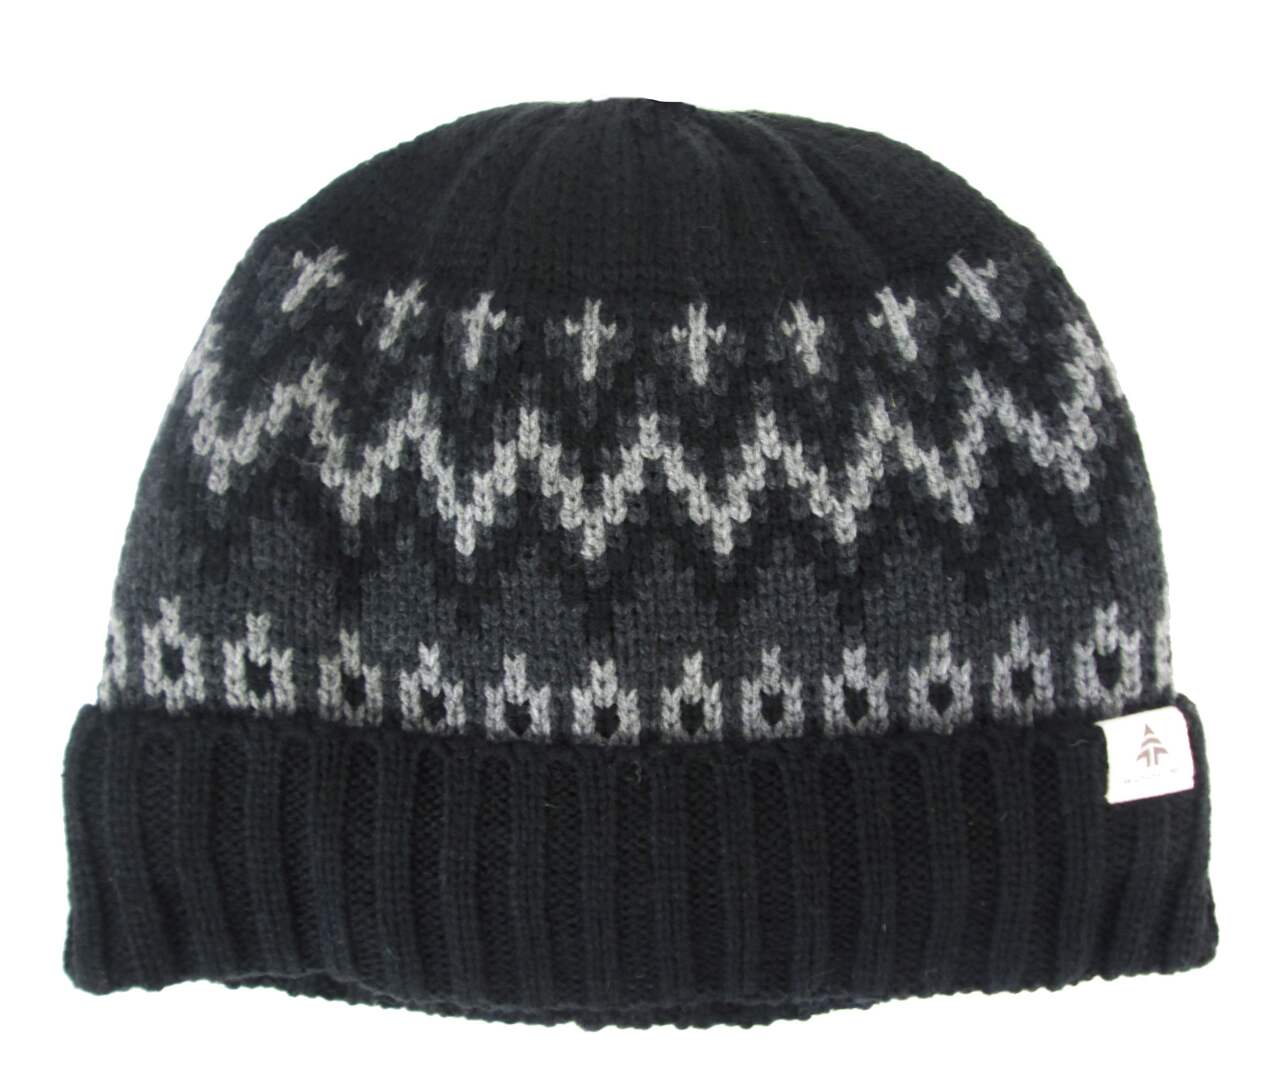 https://media-www.canadiantire.ca/product/playing/footwear-apparel/winter-footwear-apparel/1873012/woods-men-s-nordic-toque-navy-olive-o-s-a4fa45b6-47a3-49b8-bfa3-acc2ce65018c-jpgrendition.jpg?imdensity=1&imwidth=640&impolicy=mZoom